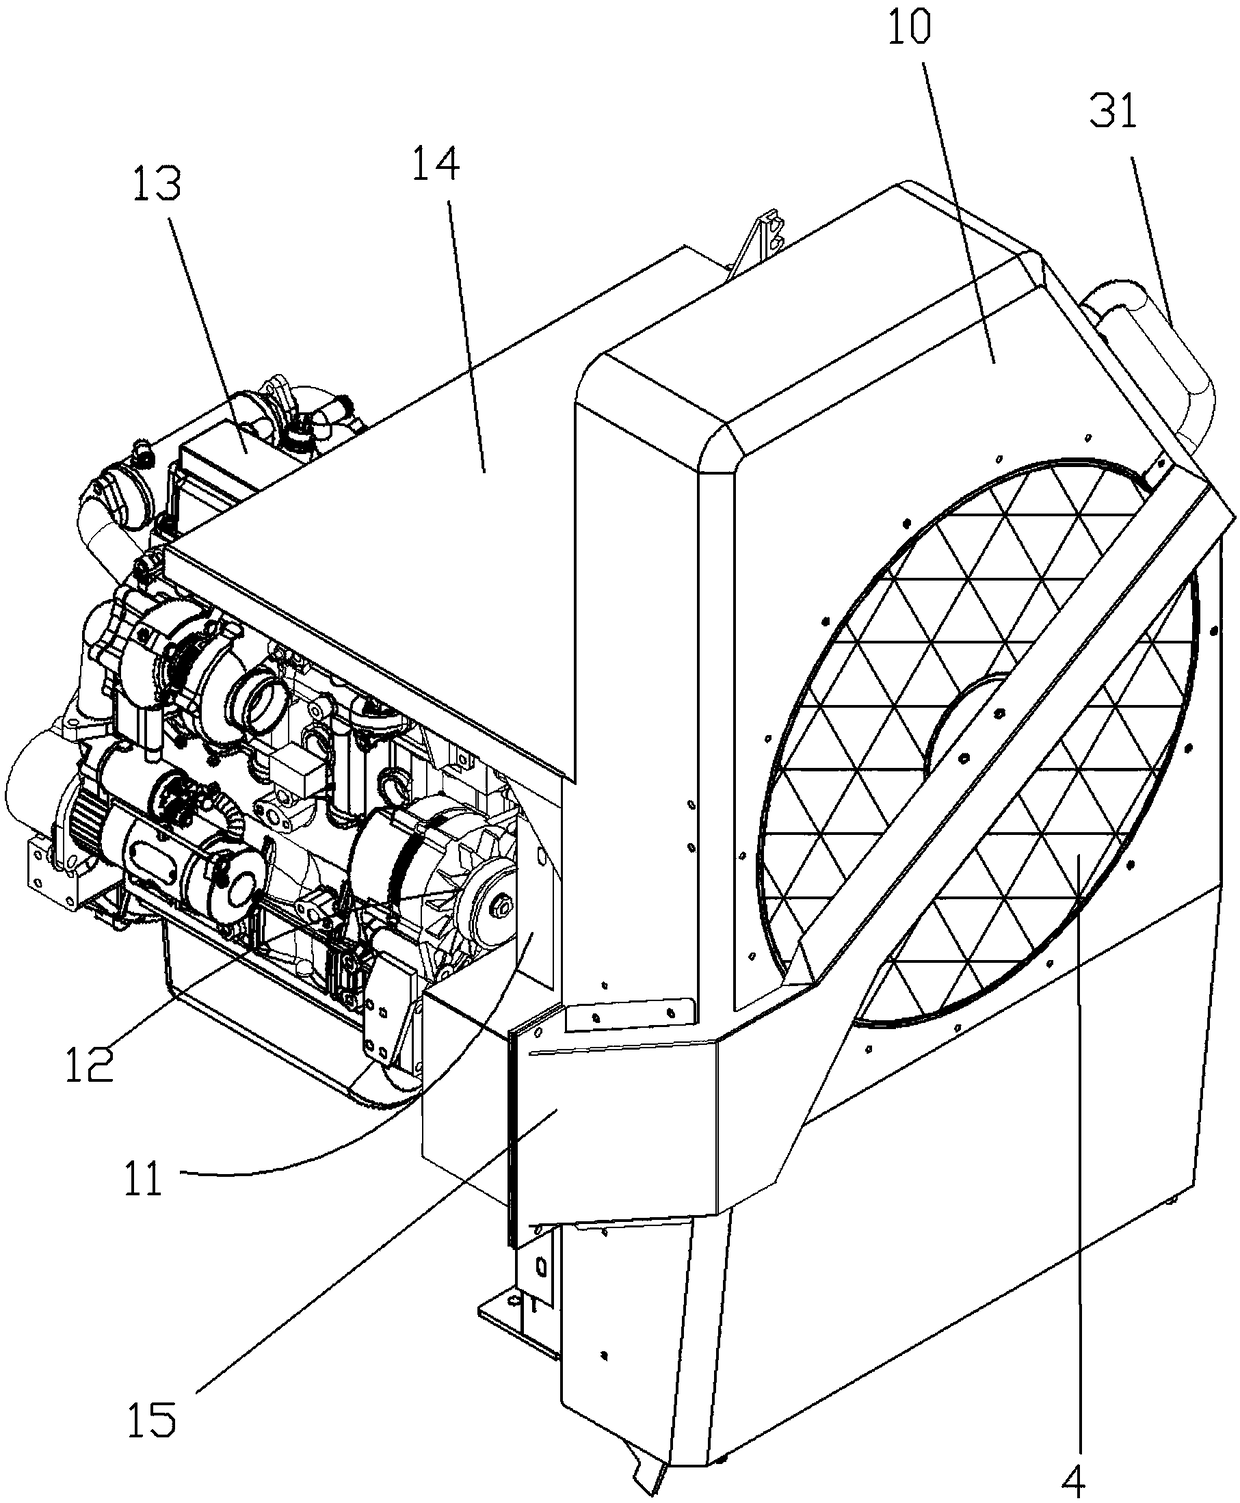 A self-rotating dust-removing device for a dust-proof mesh cover of an engine water tank